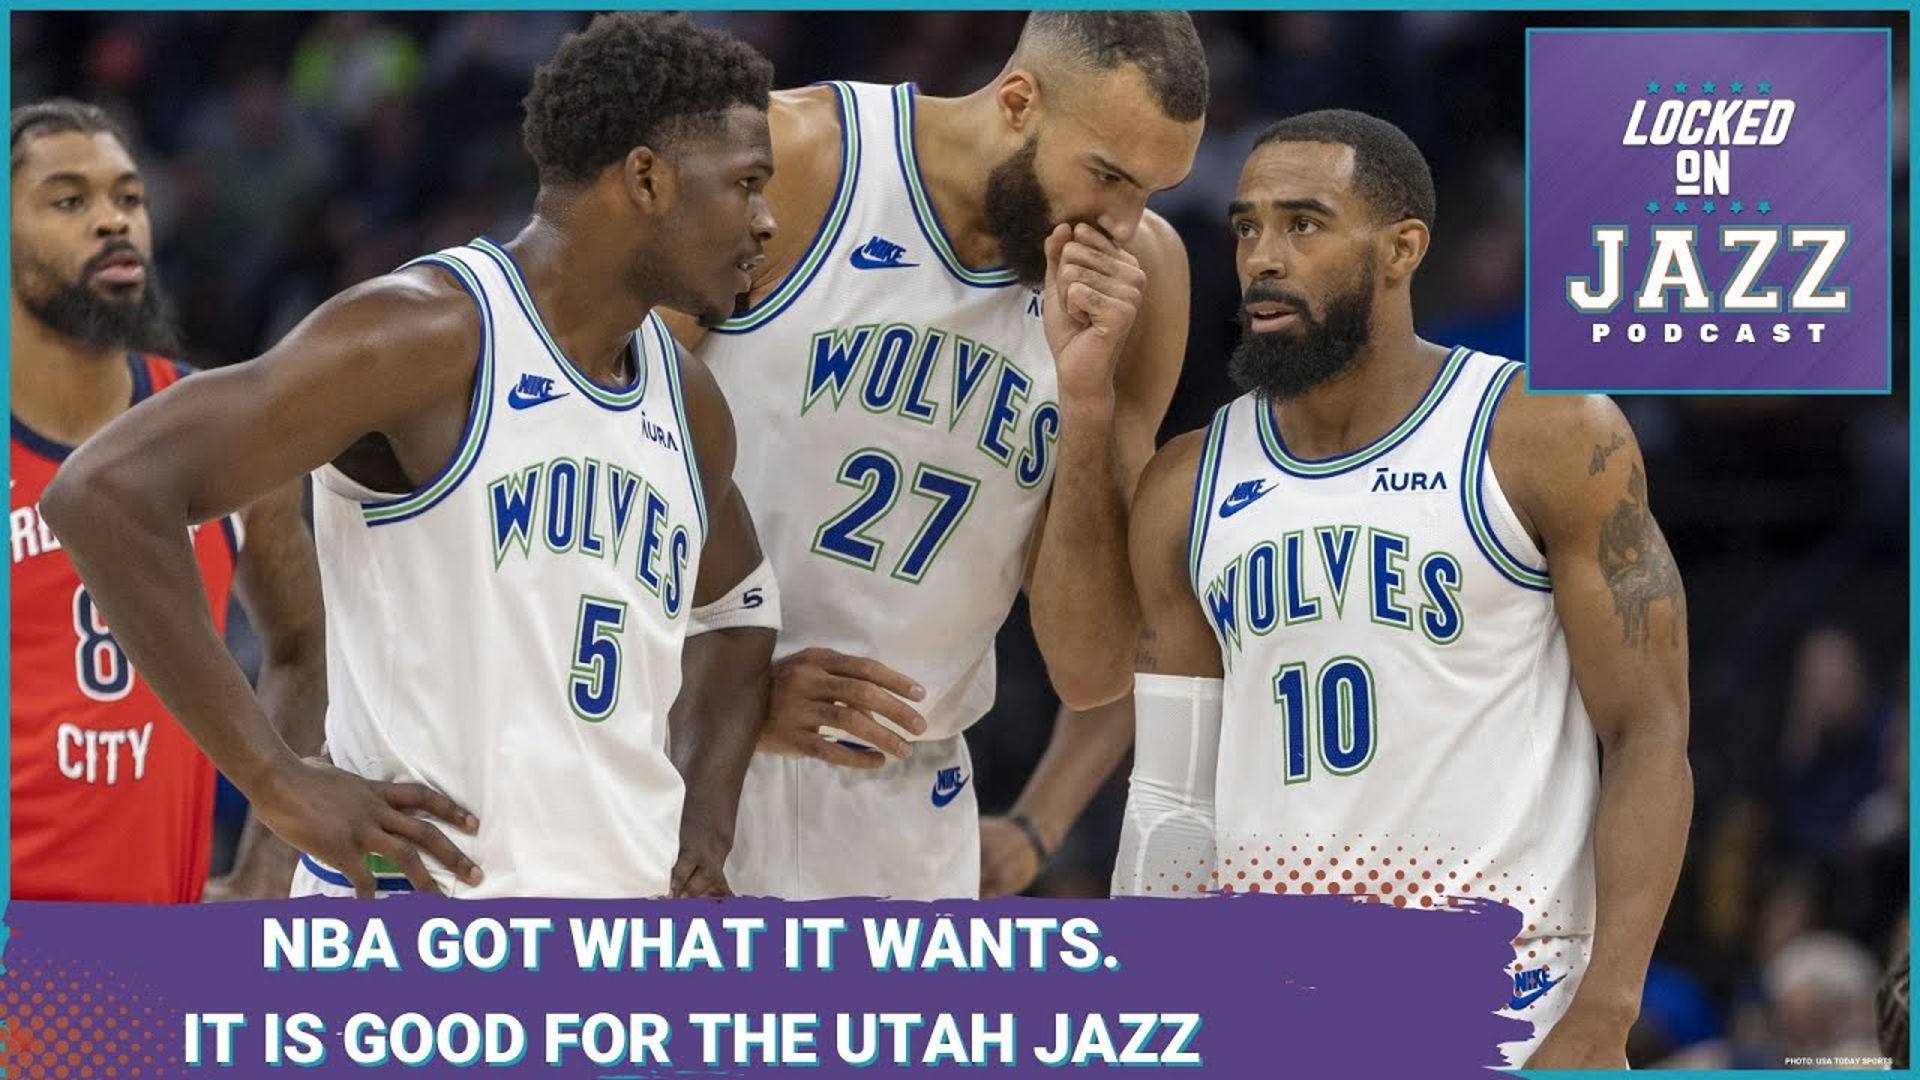 The NBA created the parody it wants and will have the their 6th champ in 6 years and it is good news for the Utah Jazz.